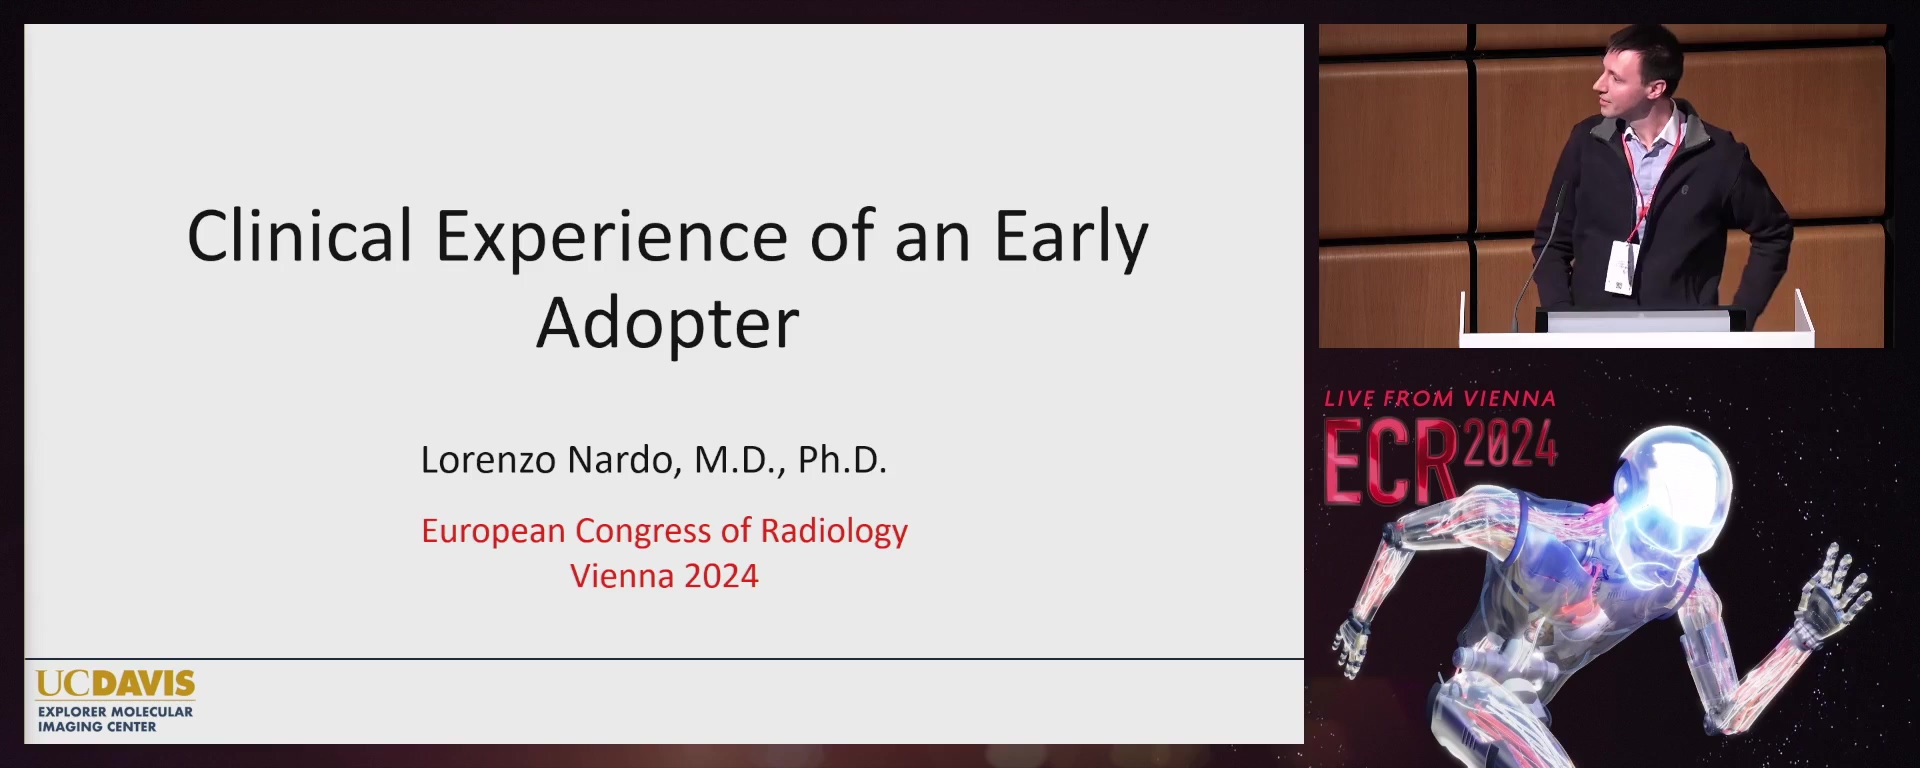 Clinical experience of an early adopter